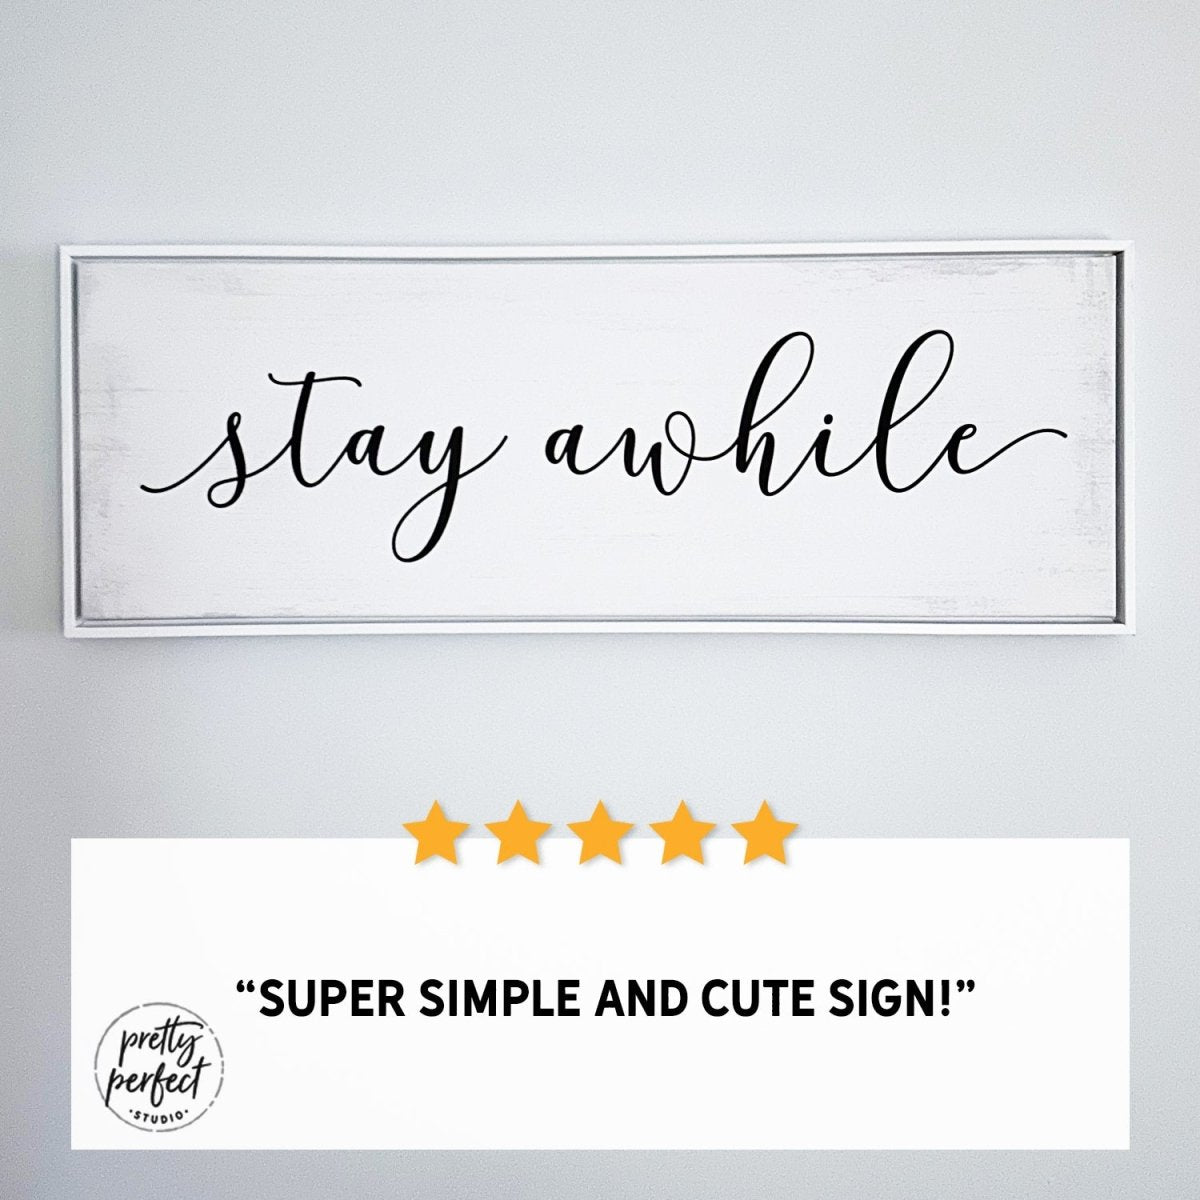 Customer product review for Stay Awhile Canvas Sign by Pretty Perfect Studio